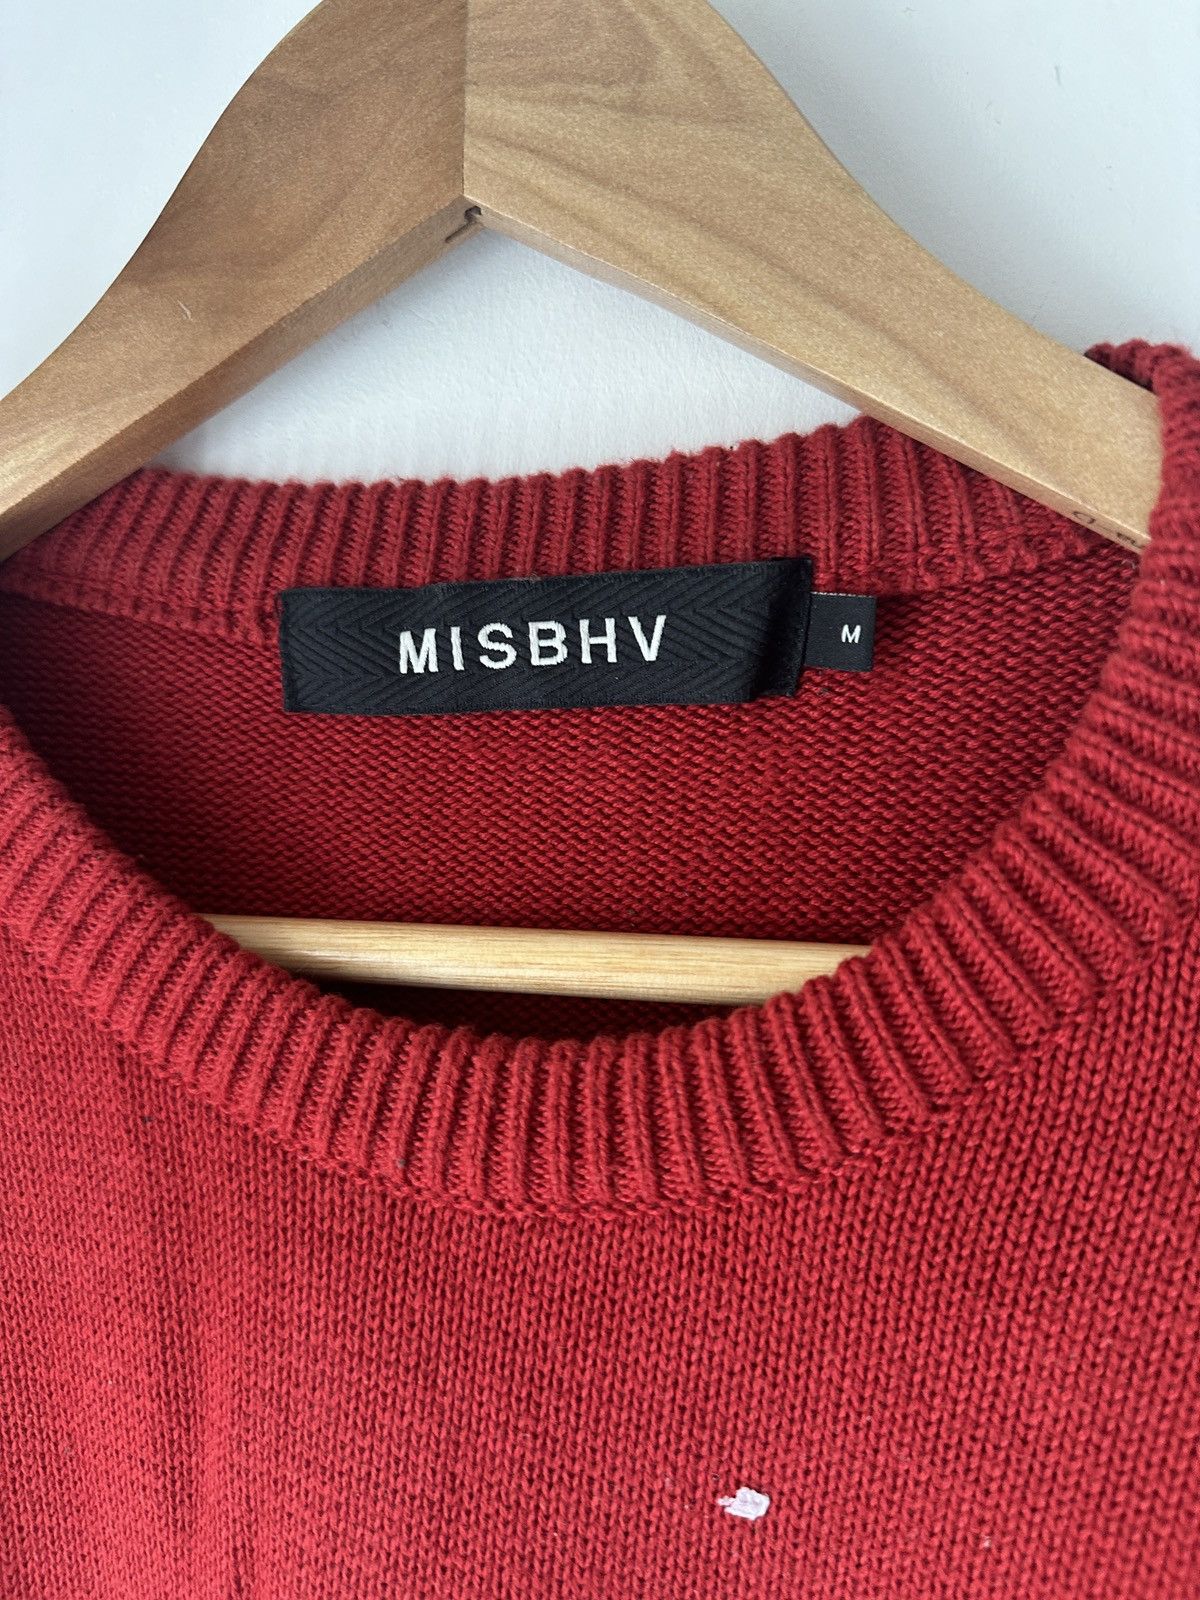 MISBHV Distressed Knitted Red Sweater - 2